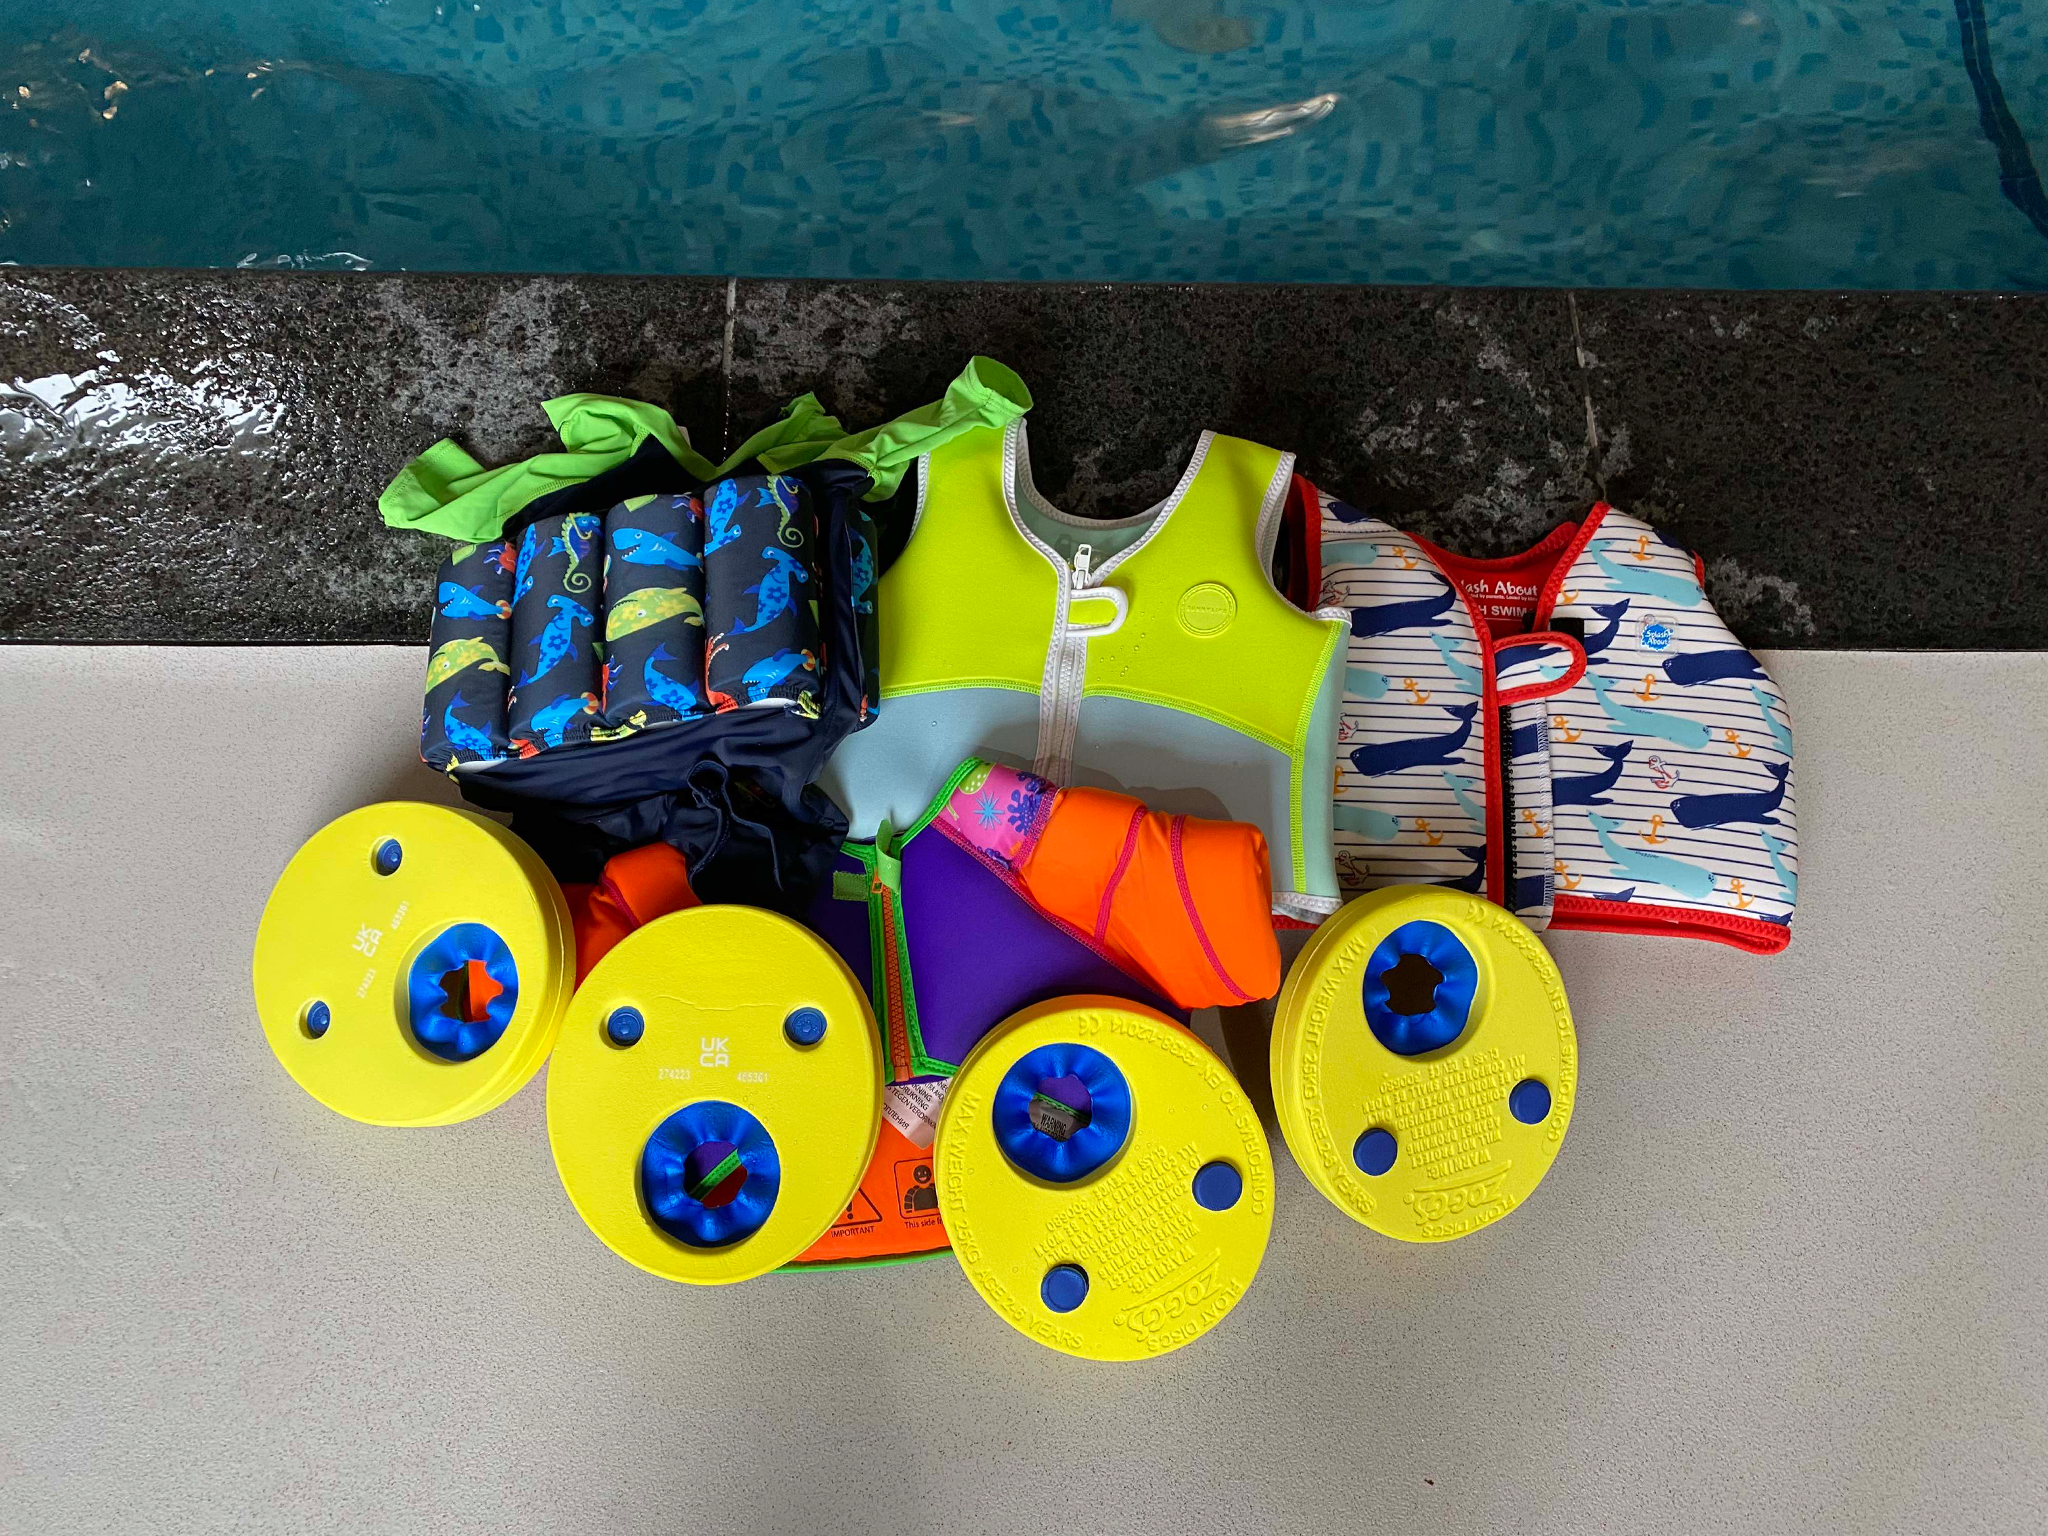 We put a range of kids’ swimming aids to the test